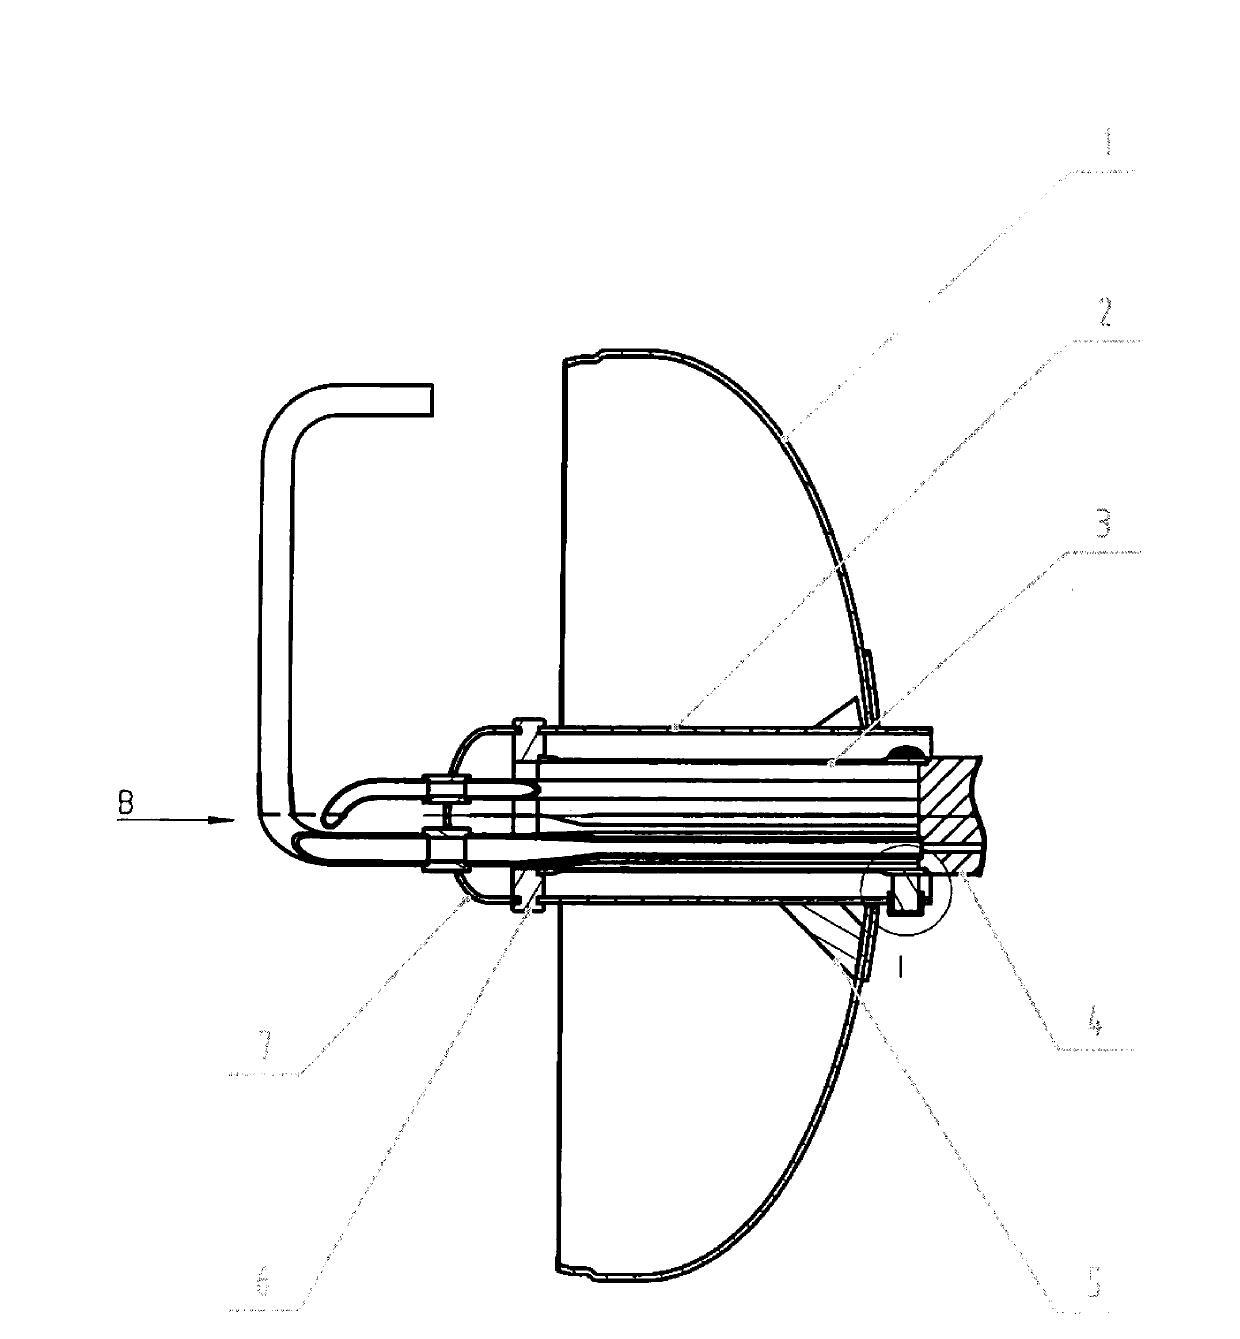 Liner supporting device provided with lengthened power spinning tube, supporting bars and ribbed plates